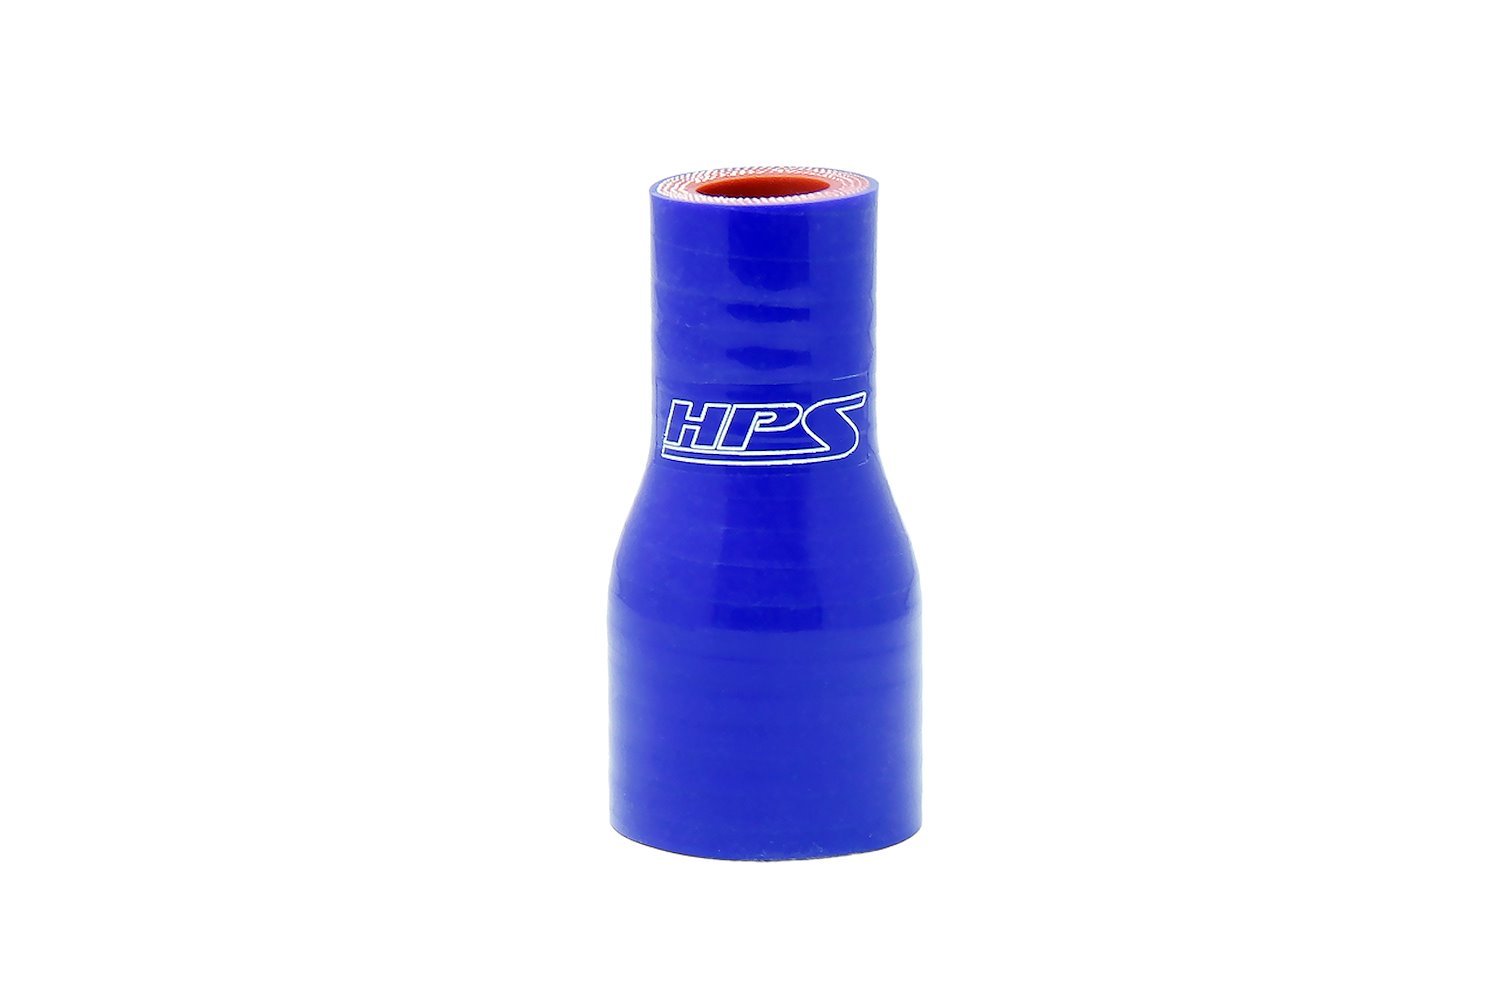 HTSR-062-150-BLUE Silicone Reducer Hose, High-Temp 4-Ply Reinforced, 5/8 in. - 1-1/2 in. ID, 3 in. Long, Blue